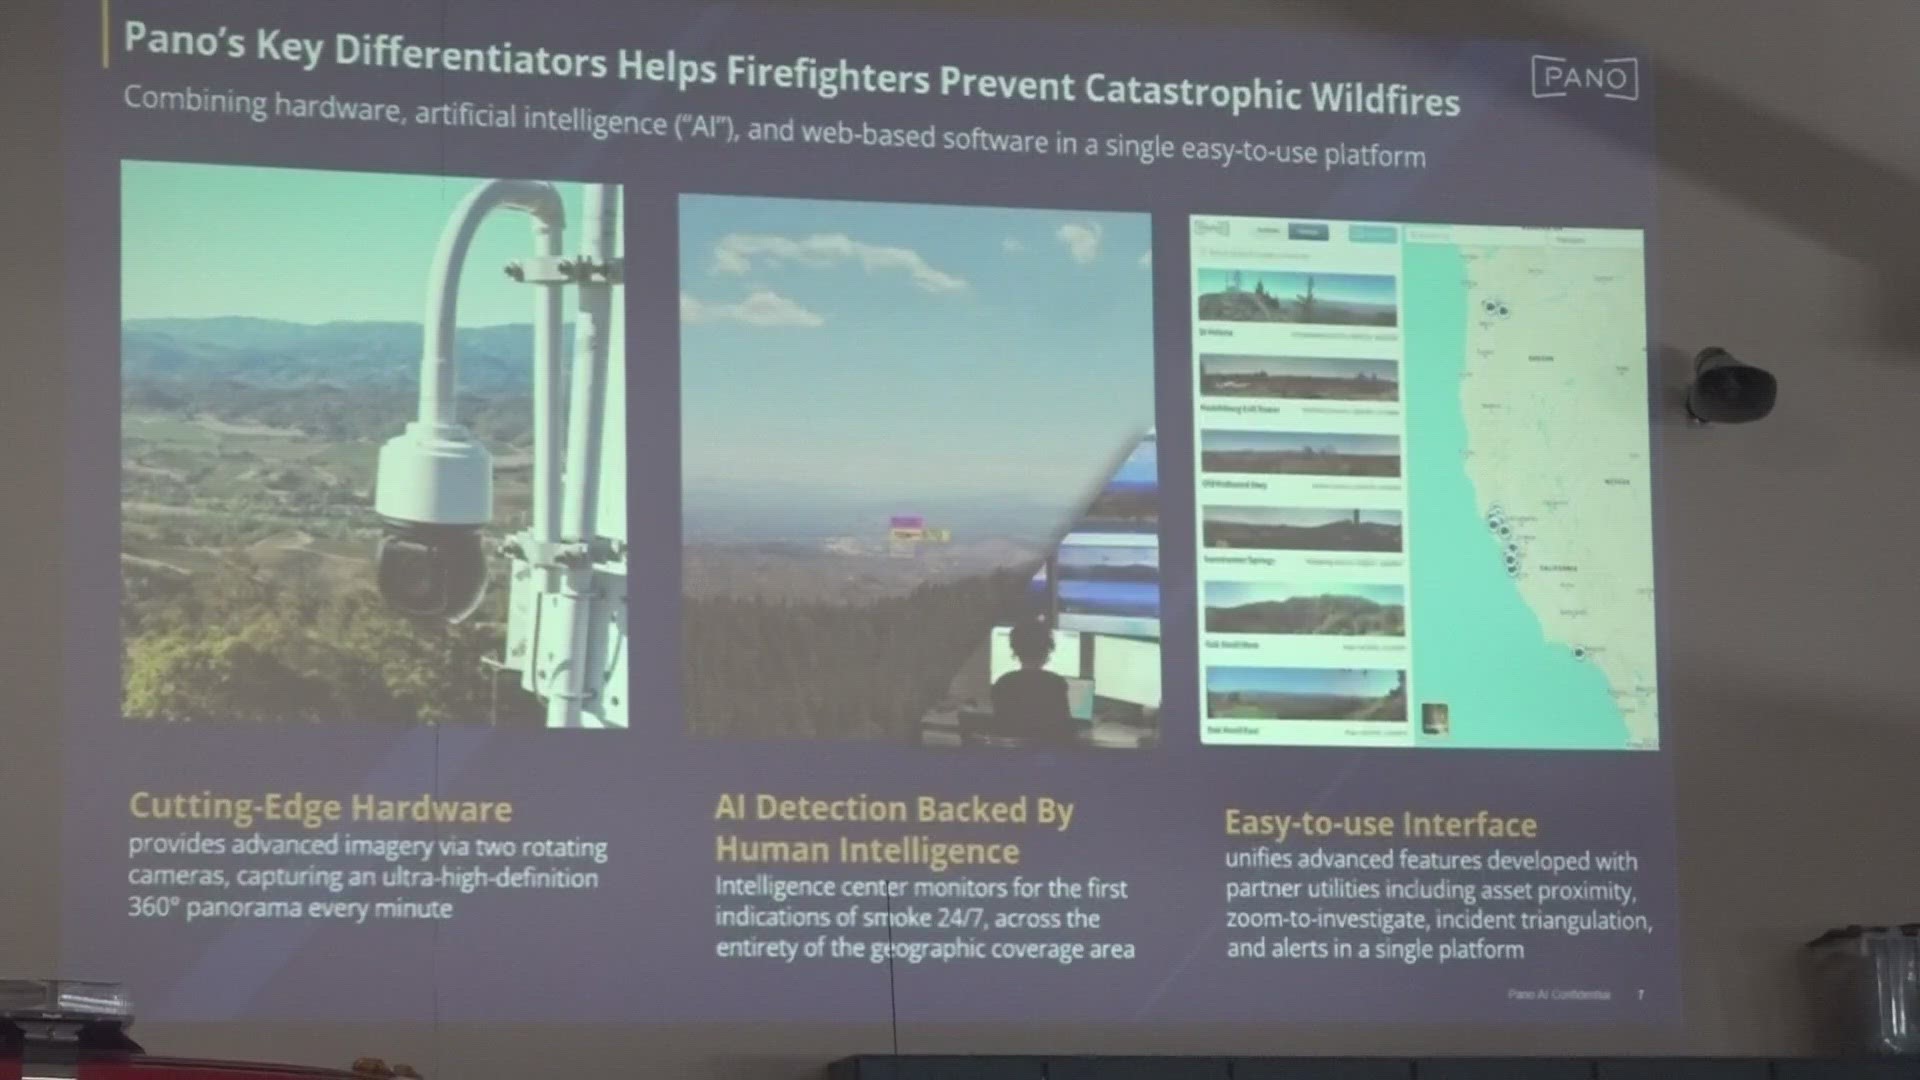 The new pilot program will enable early detection and monitoring to provide better data on wildfires as they emerge.